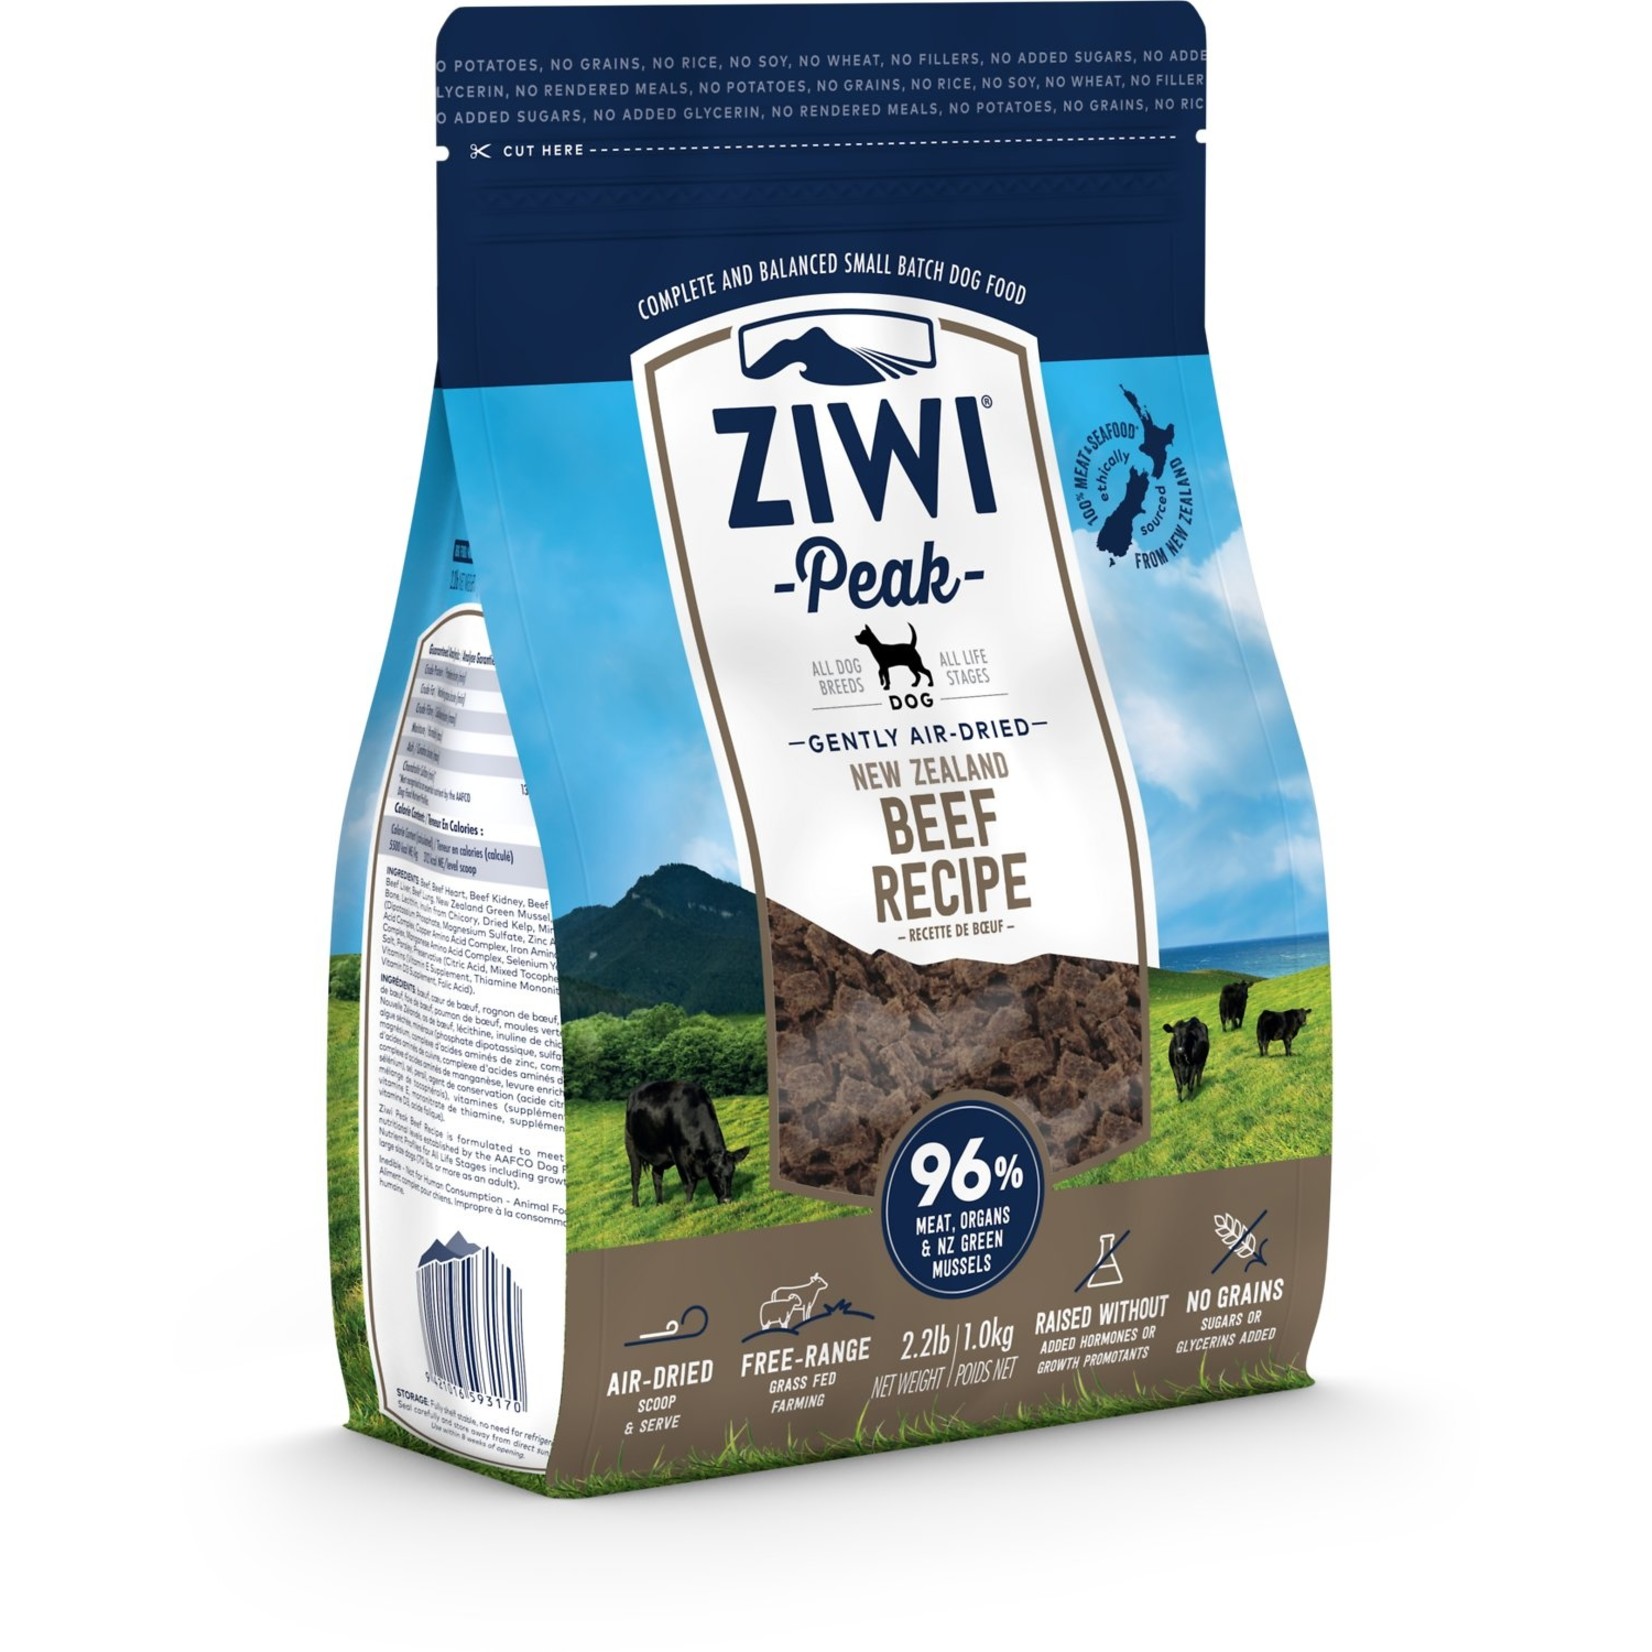 ZIWI Pets ZIWI Peak Original - Gently Air-Dried Beef Recipe for Dogs